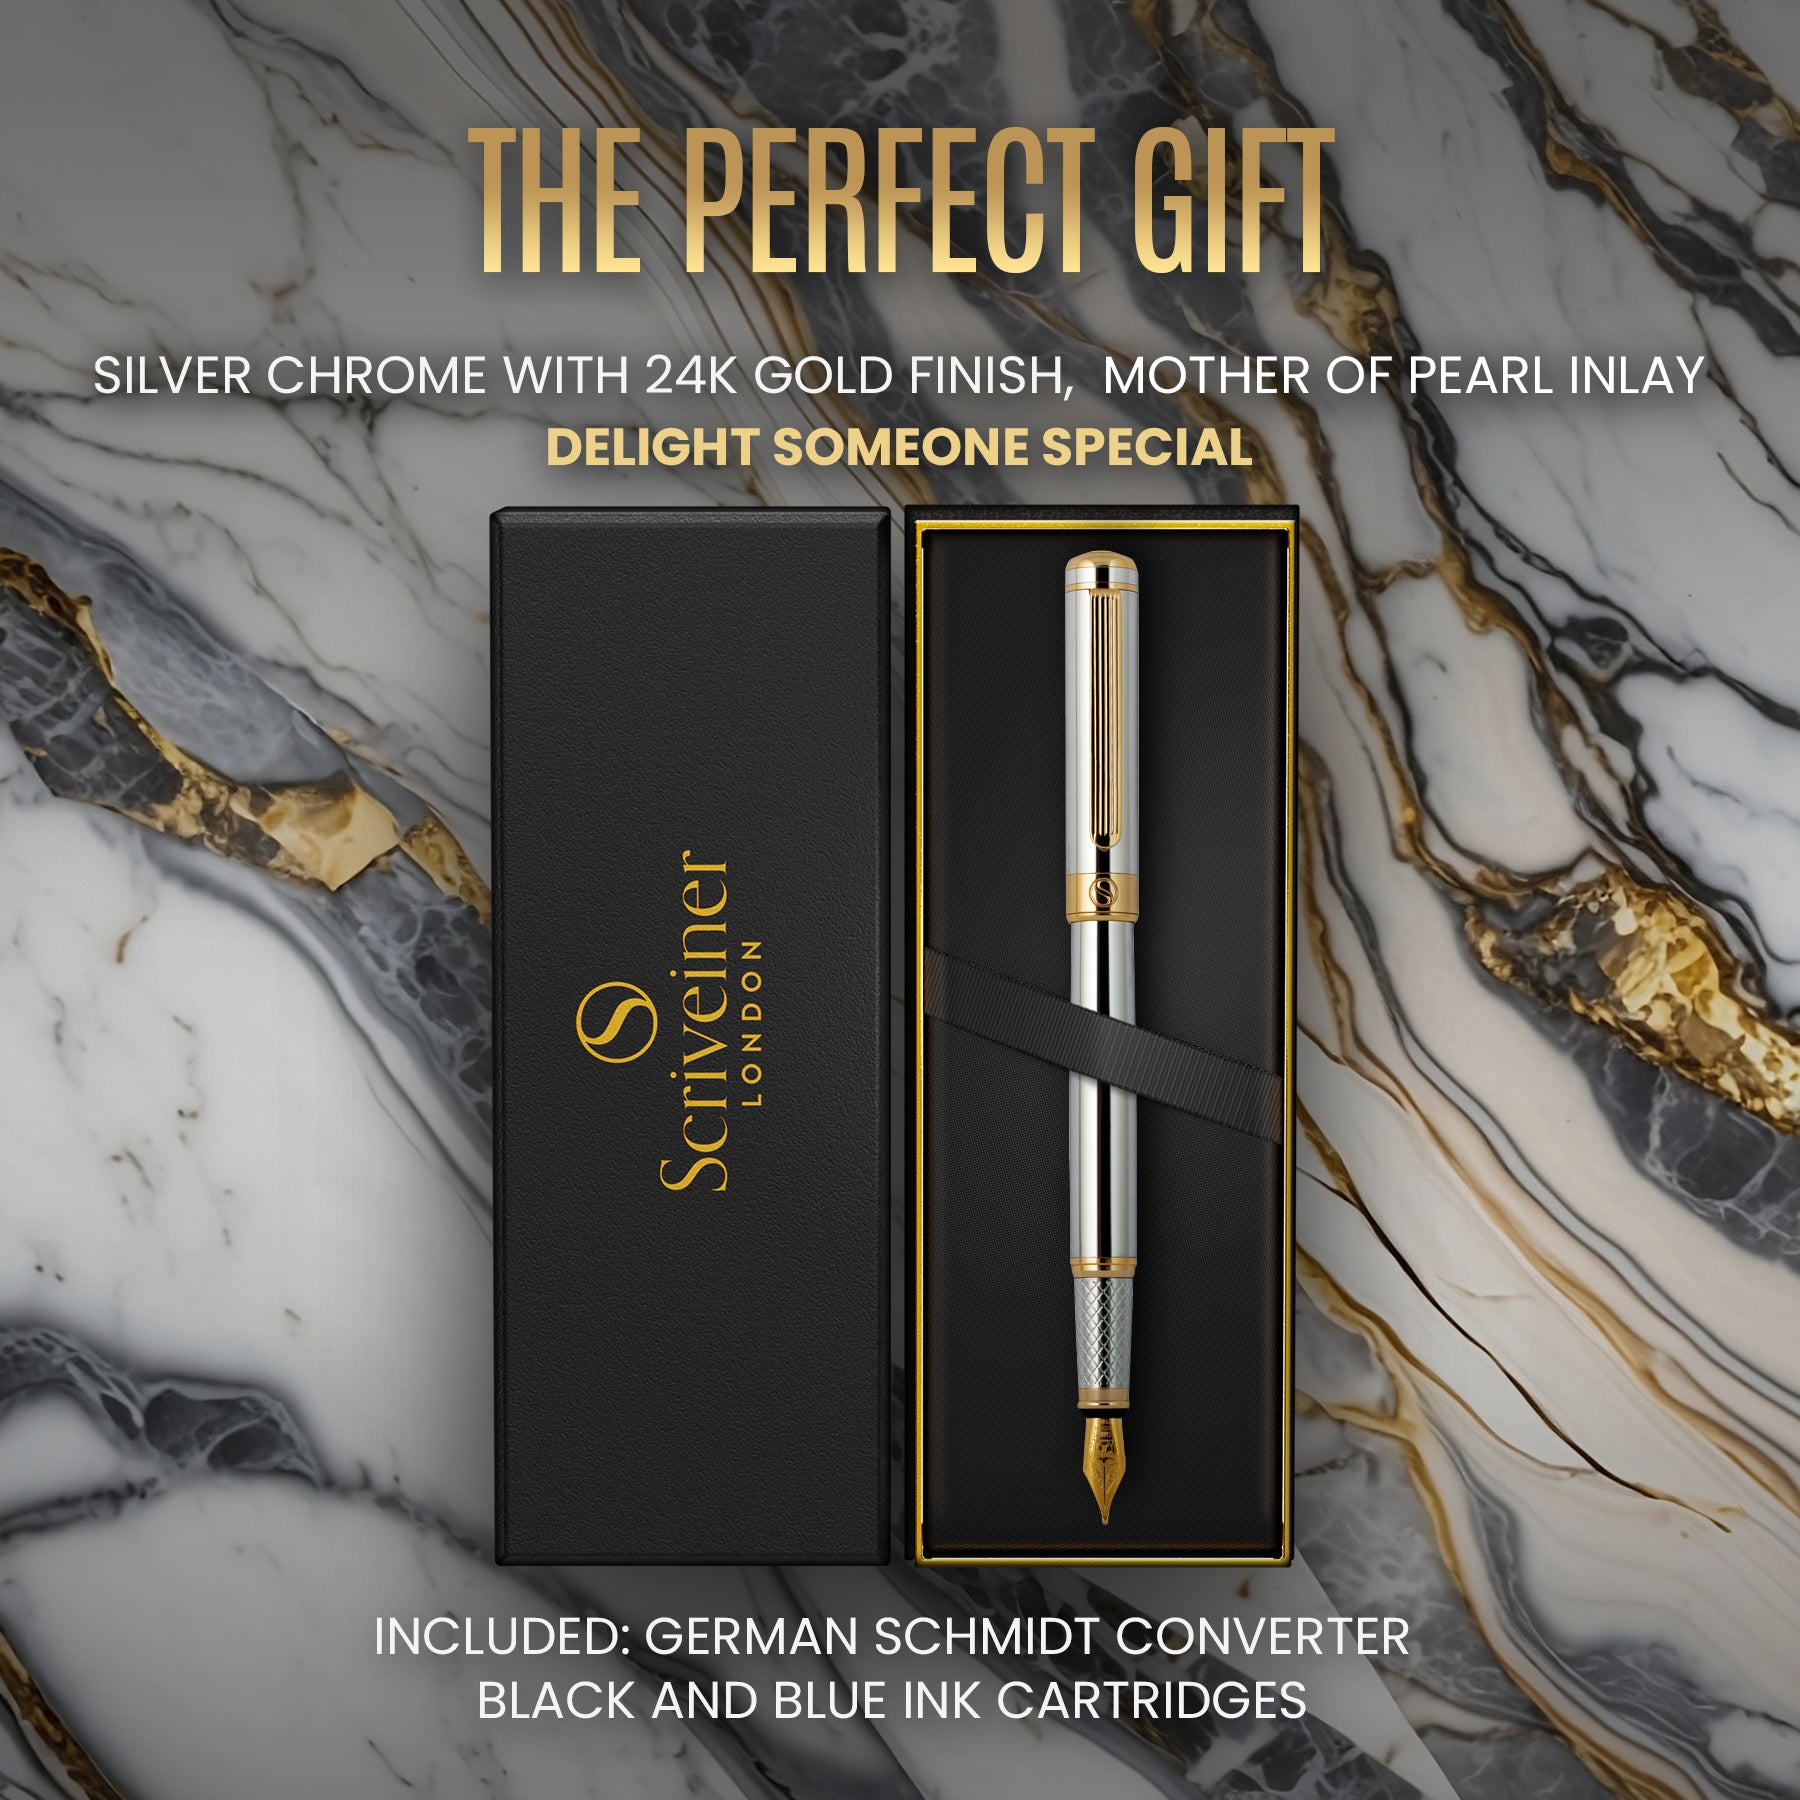 Parker Jotter Gold Ballpoint Pen Blue Ink With A Gift Box